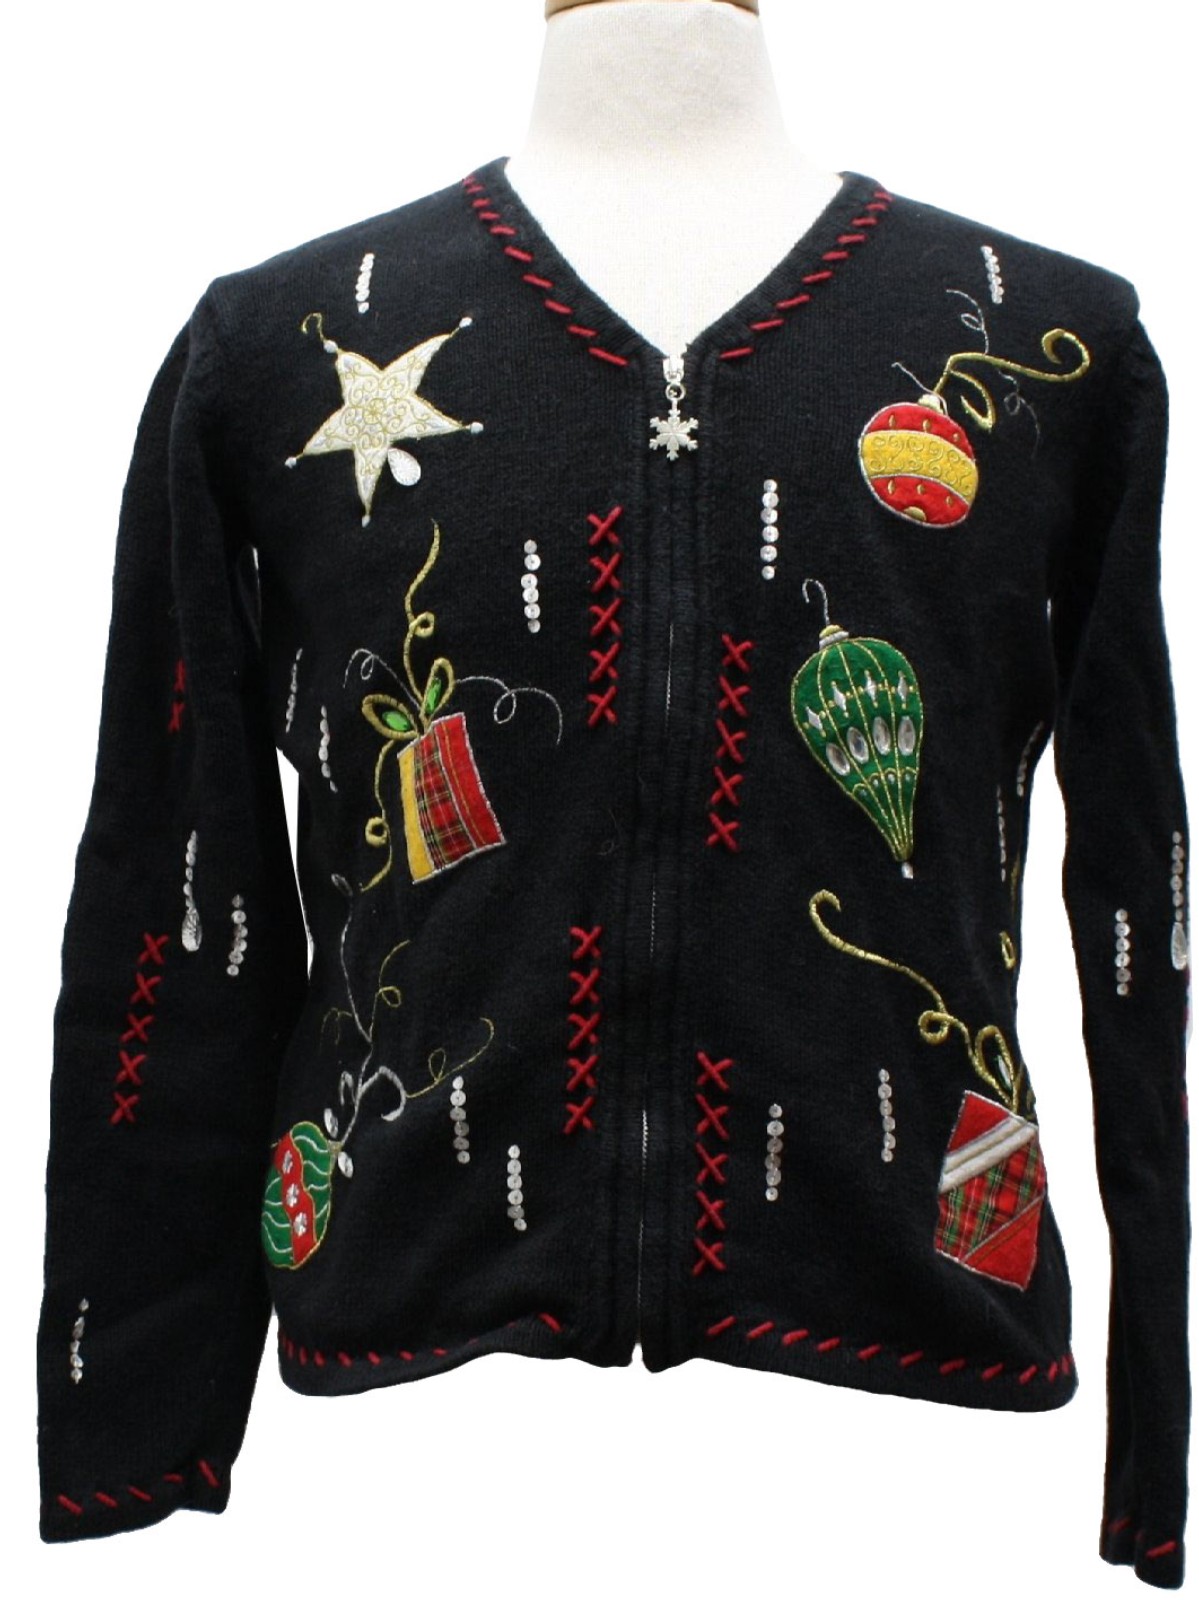 Womens Ugly Christmas Sweater: -Holiday Editions- Womens black ...